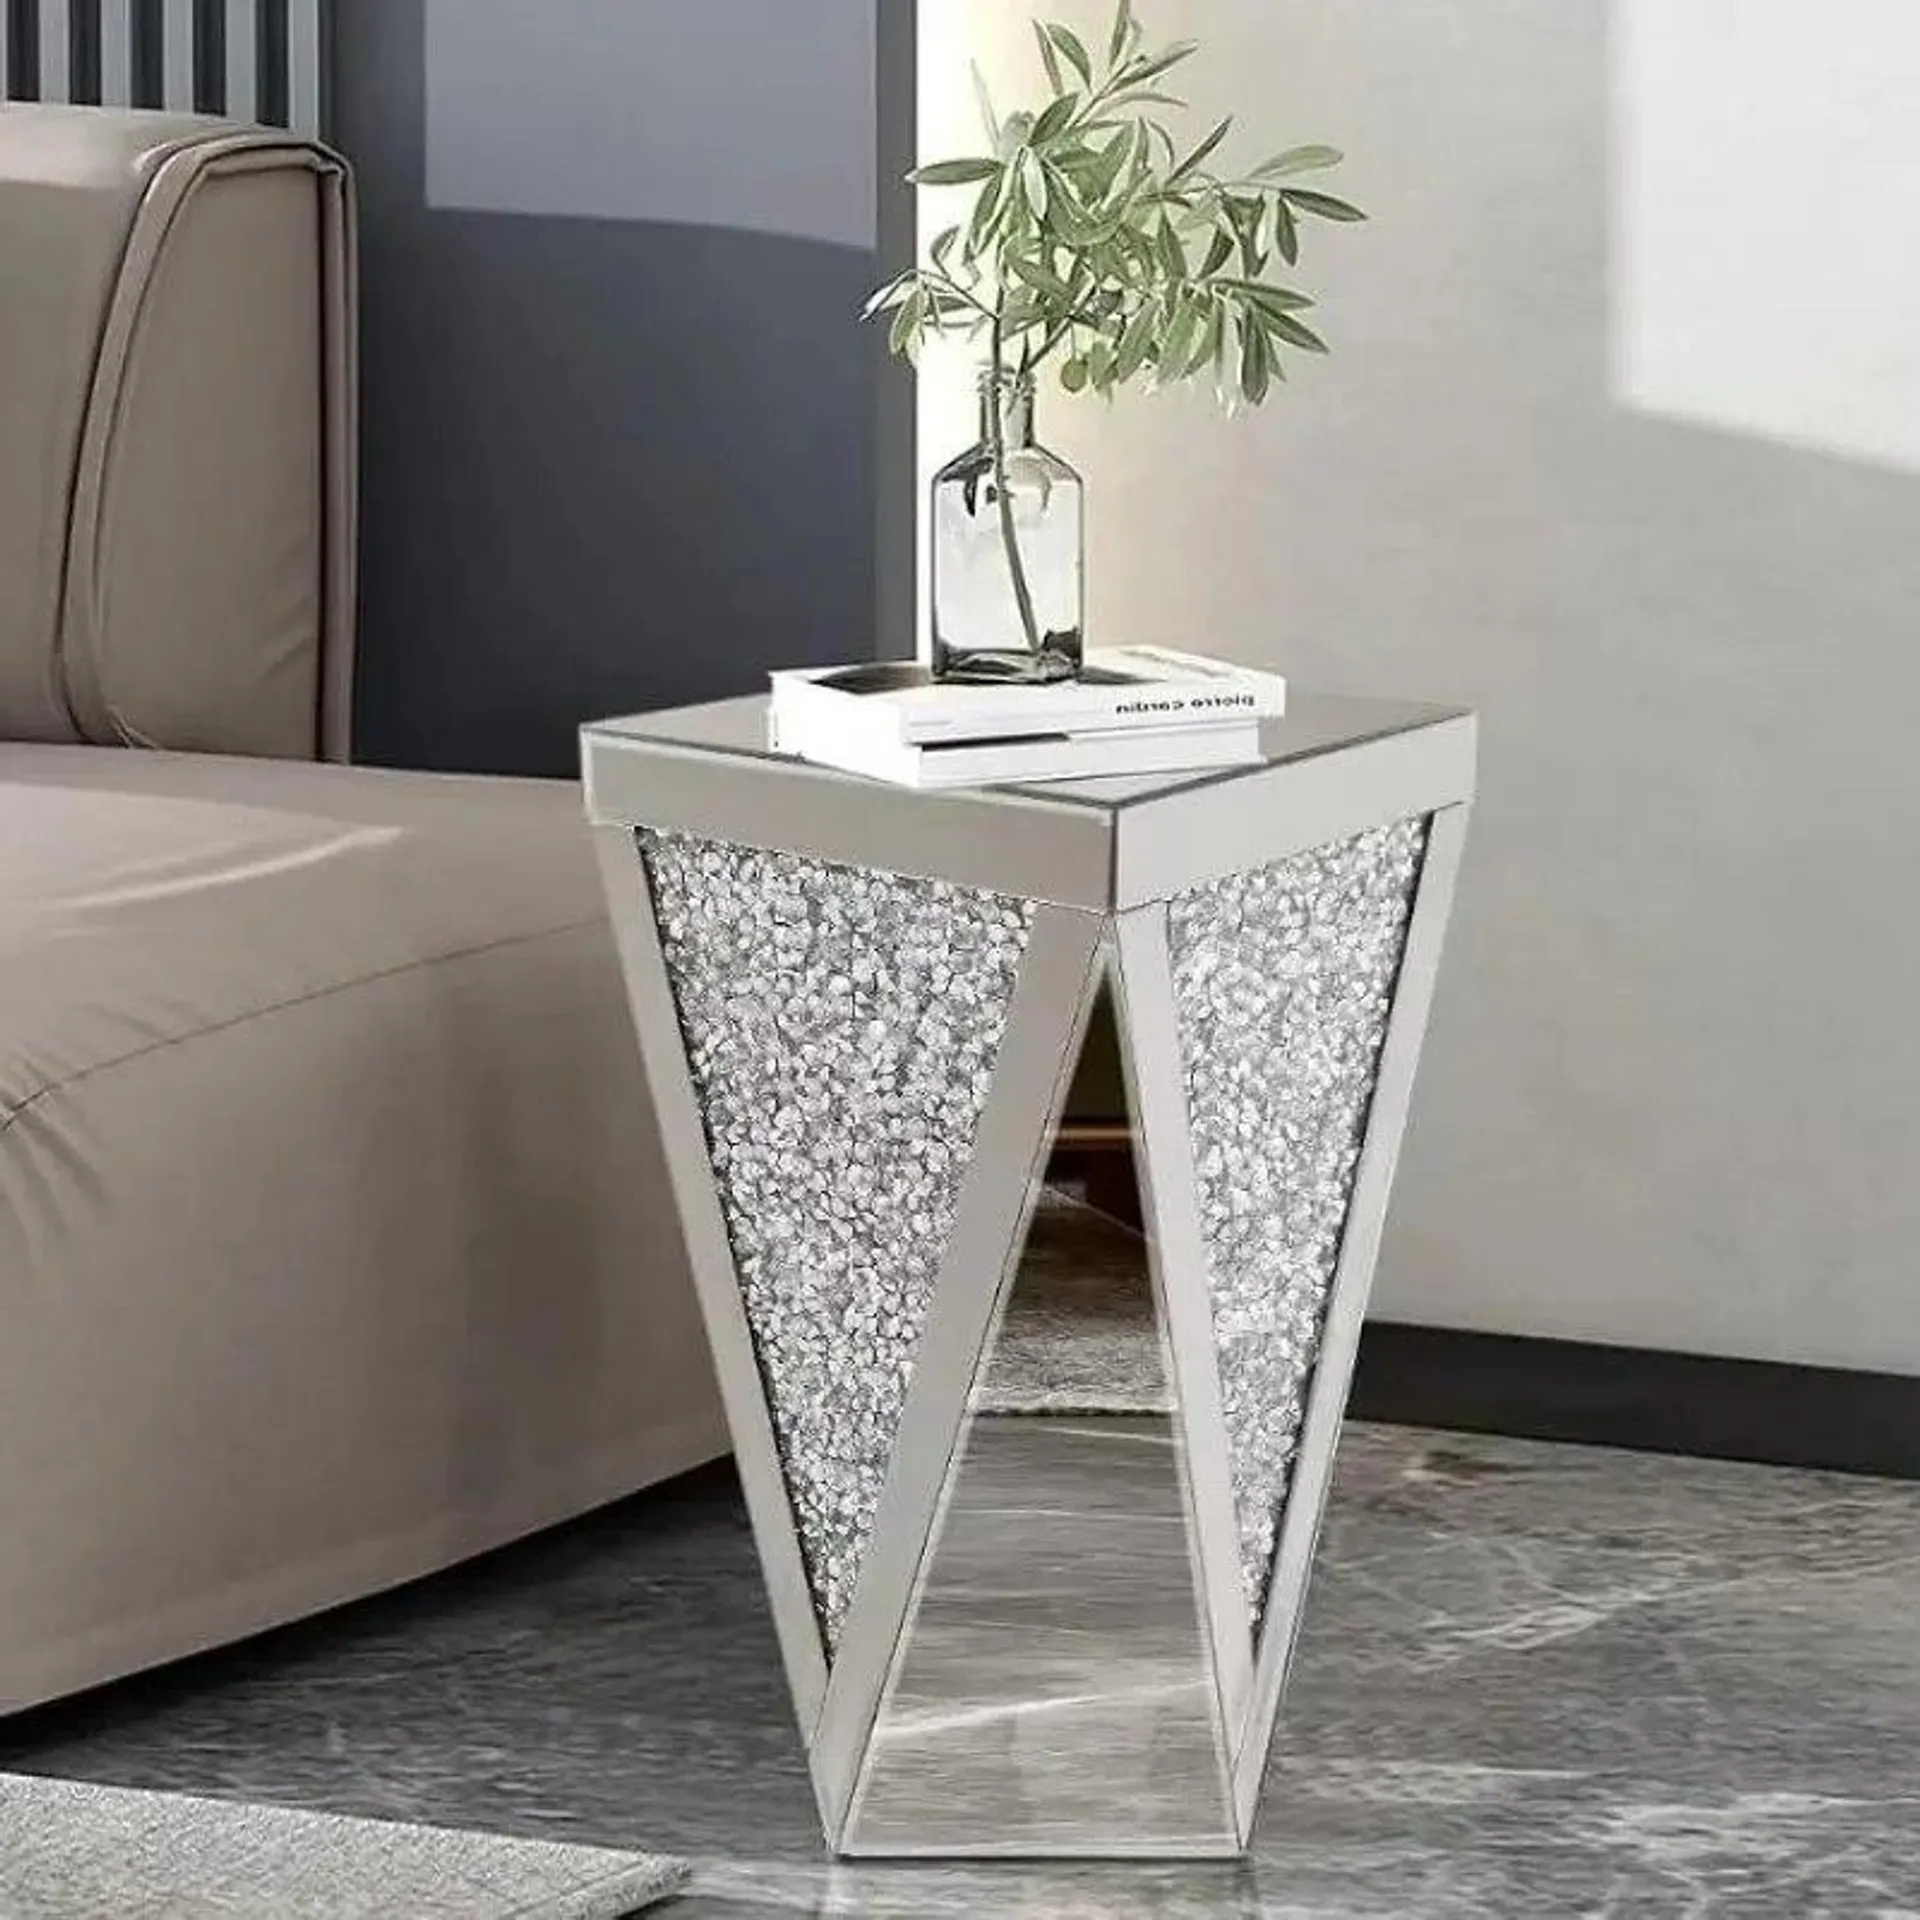 Pregaspor Silver Mirrored End Table, Crystal Inlay Side Table Accent Table, Small Mirrored Coffee Table for Living Room, Bedroom